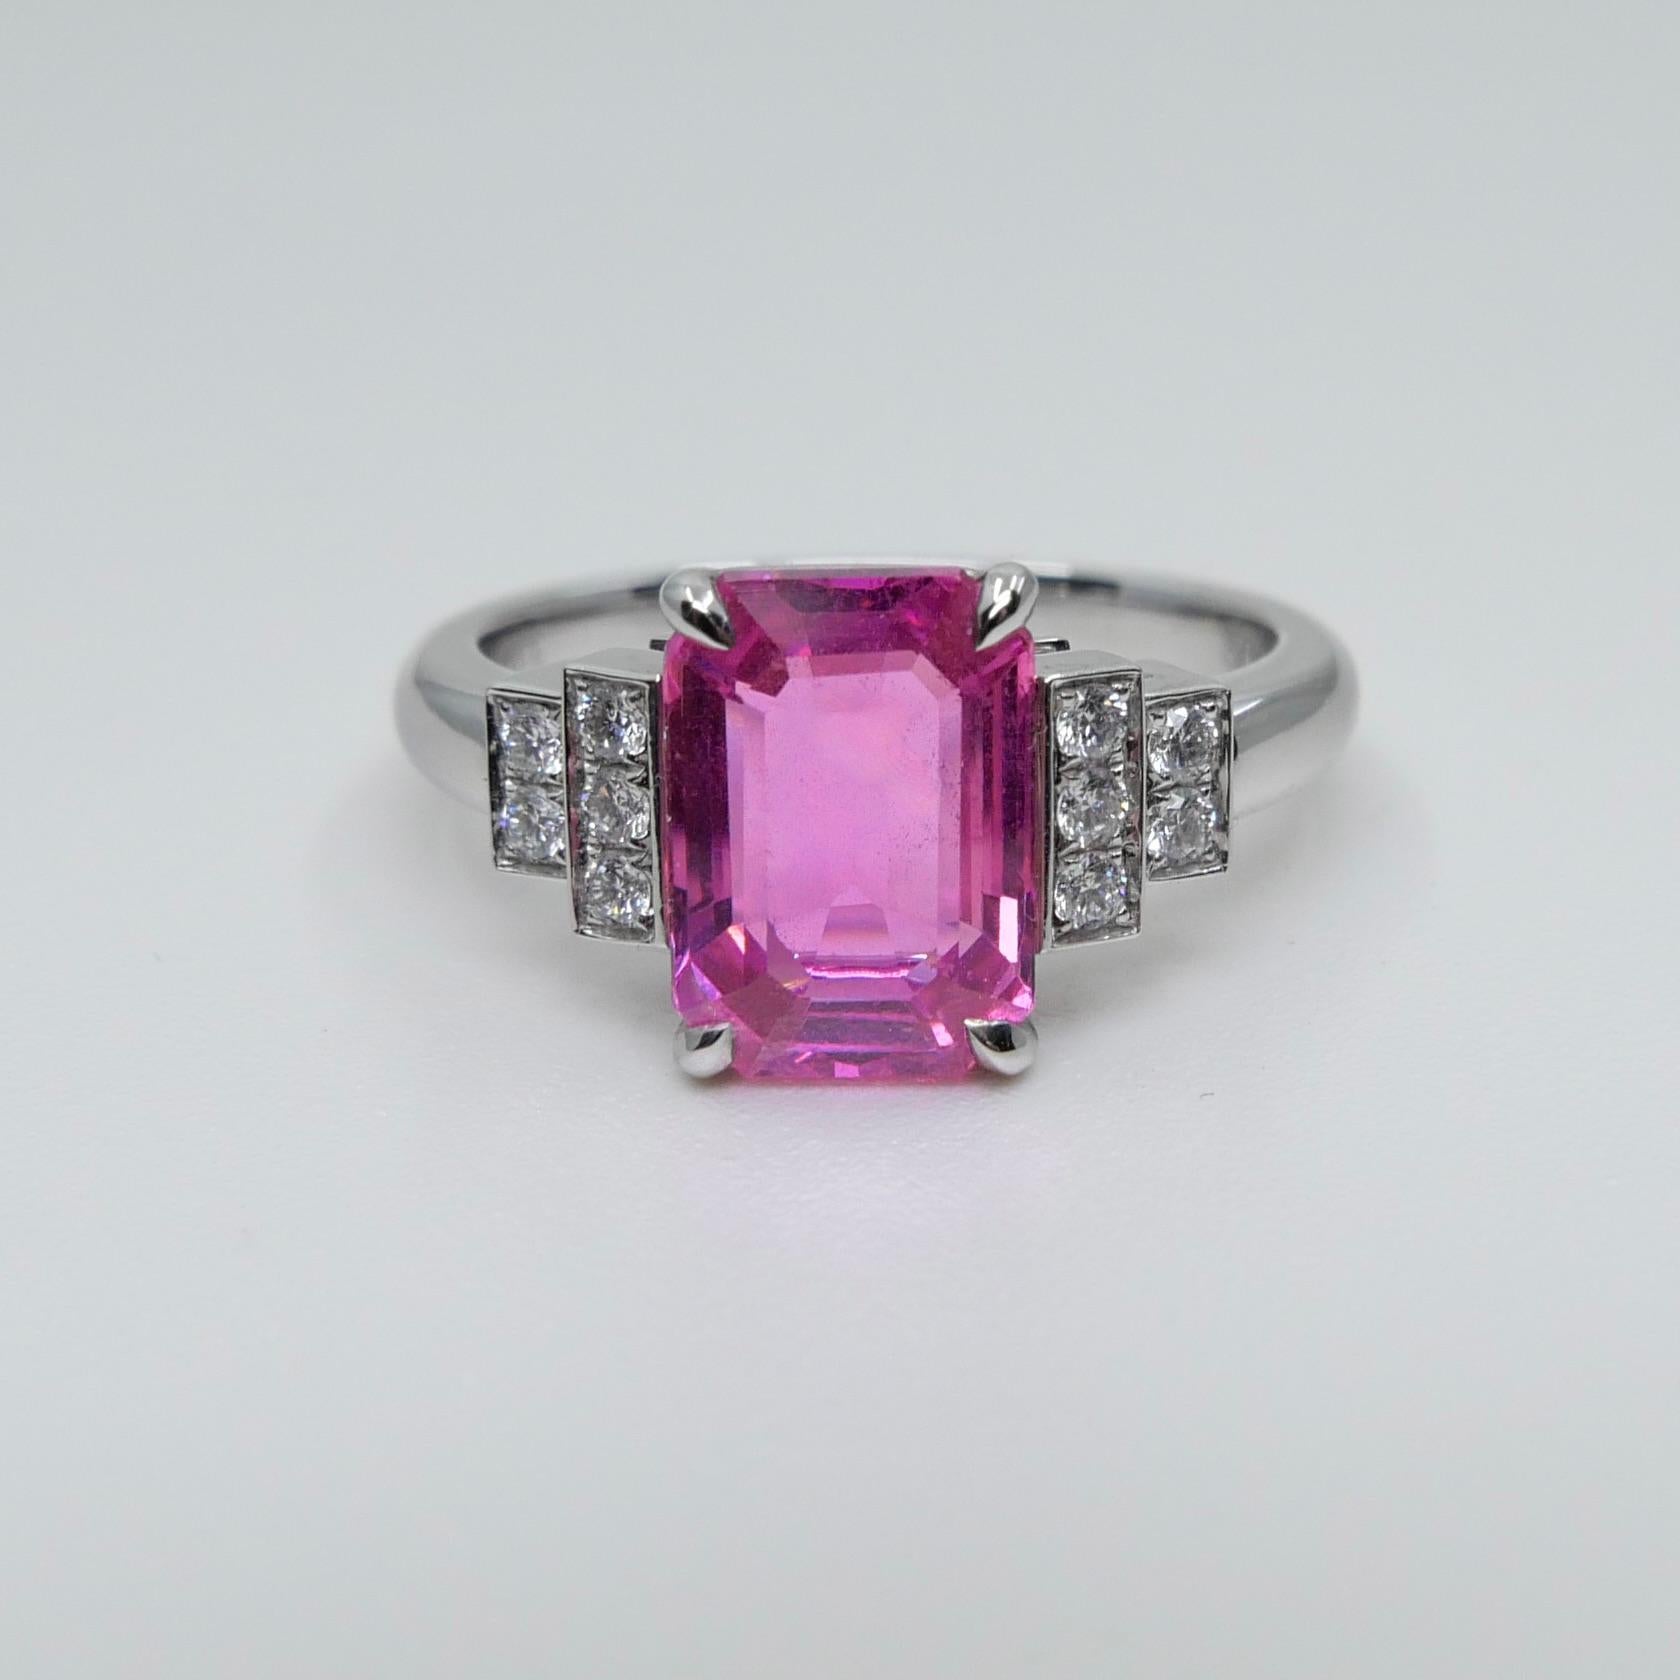 GRS Certified 3.11 Cts No Heat Pink Sapphire & Diamond Ring. Art Deco Style 3